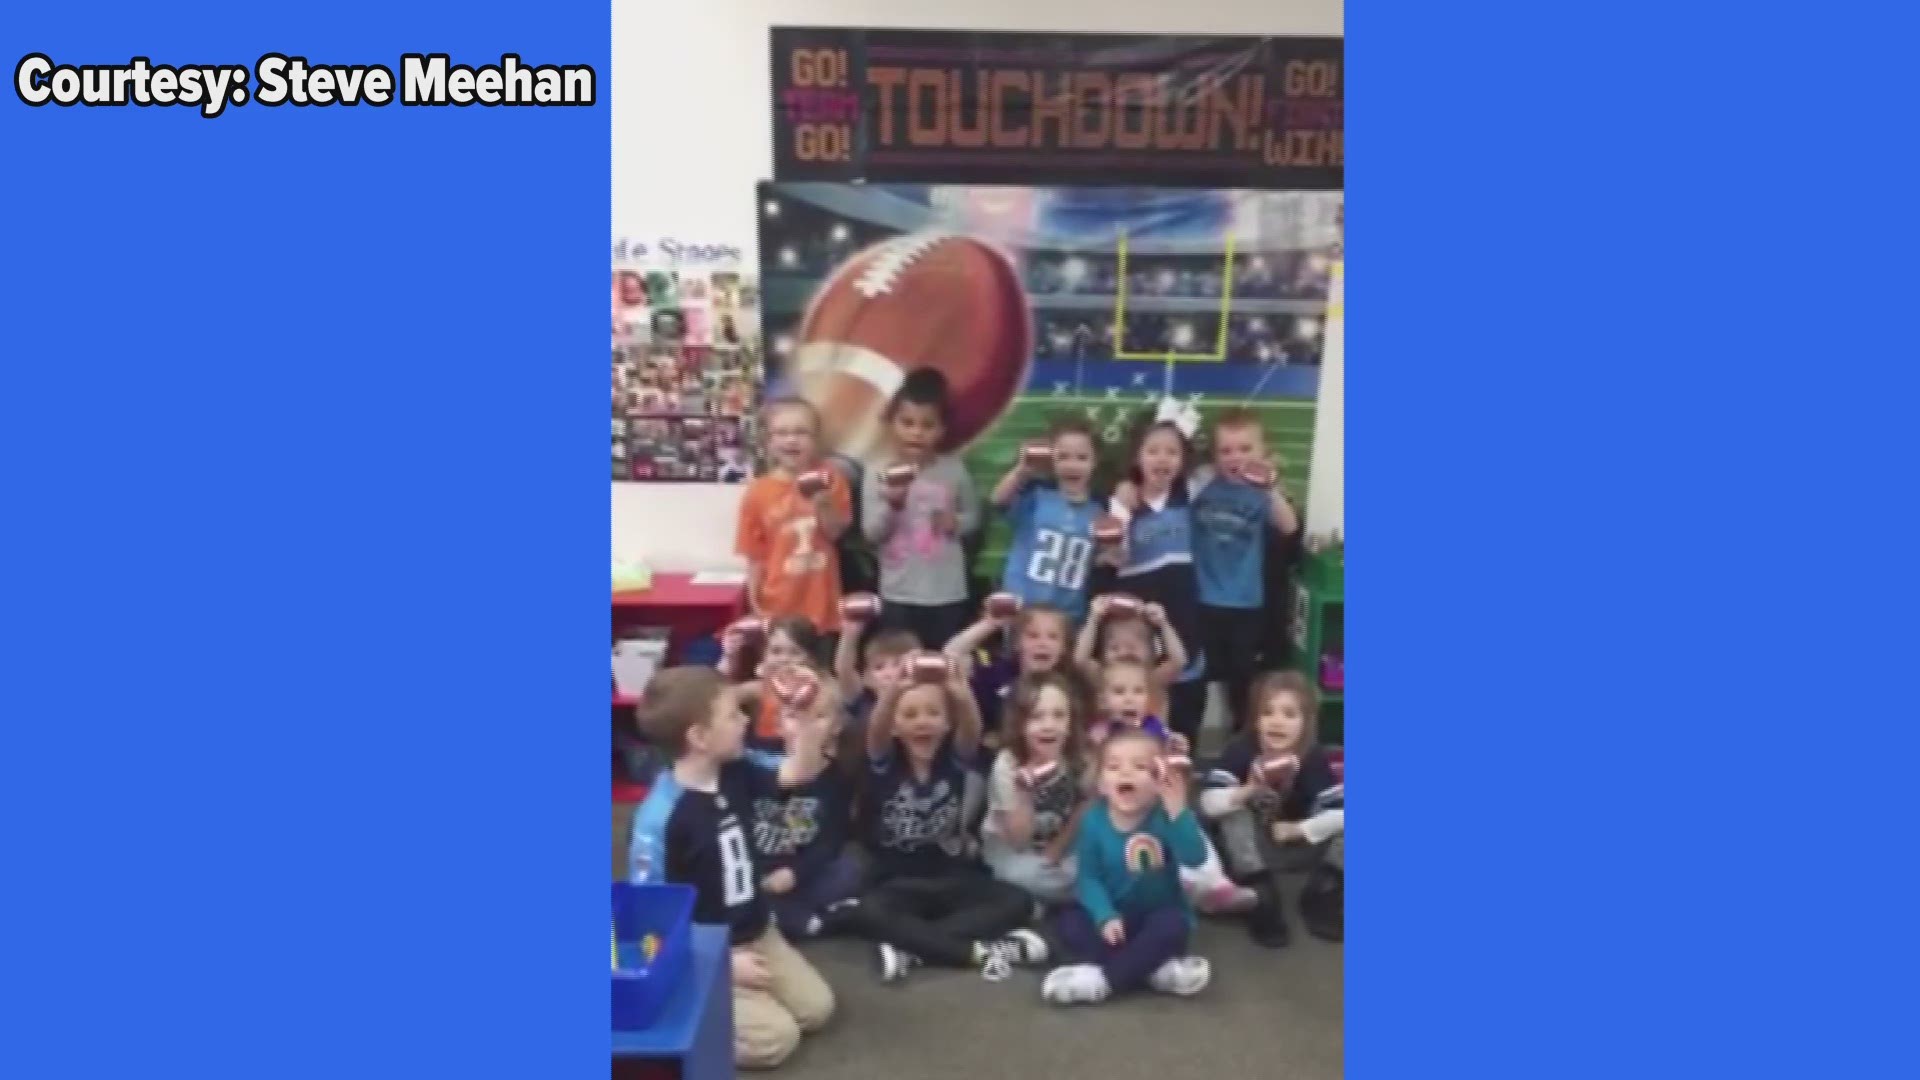 Tennessee Titans kick off at 3:05 p.m. Sunday but students in Miss Amie's class at Hilltop Child Development Center celebrated this week.